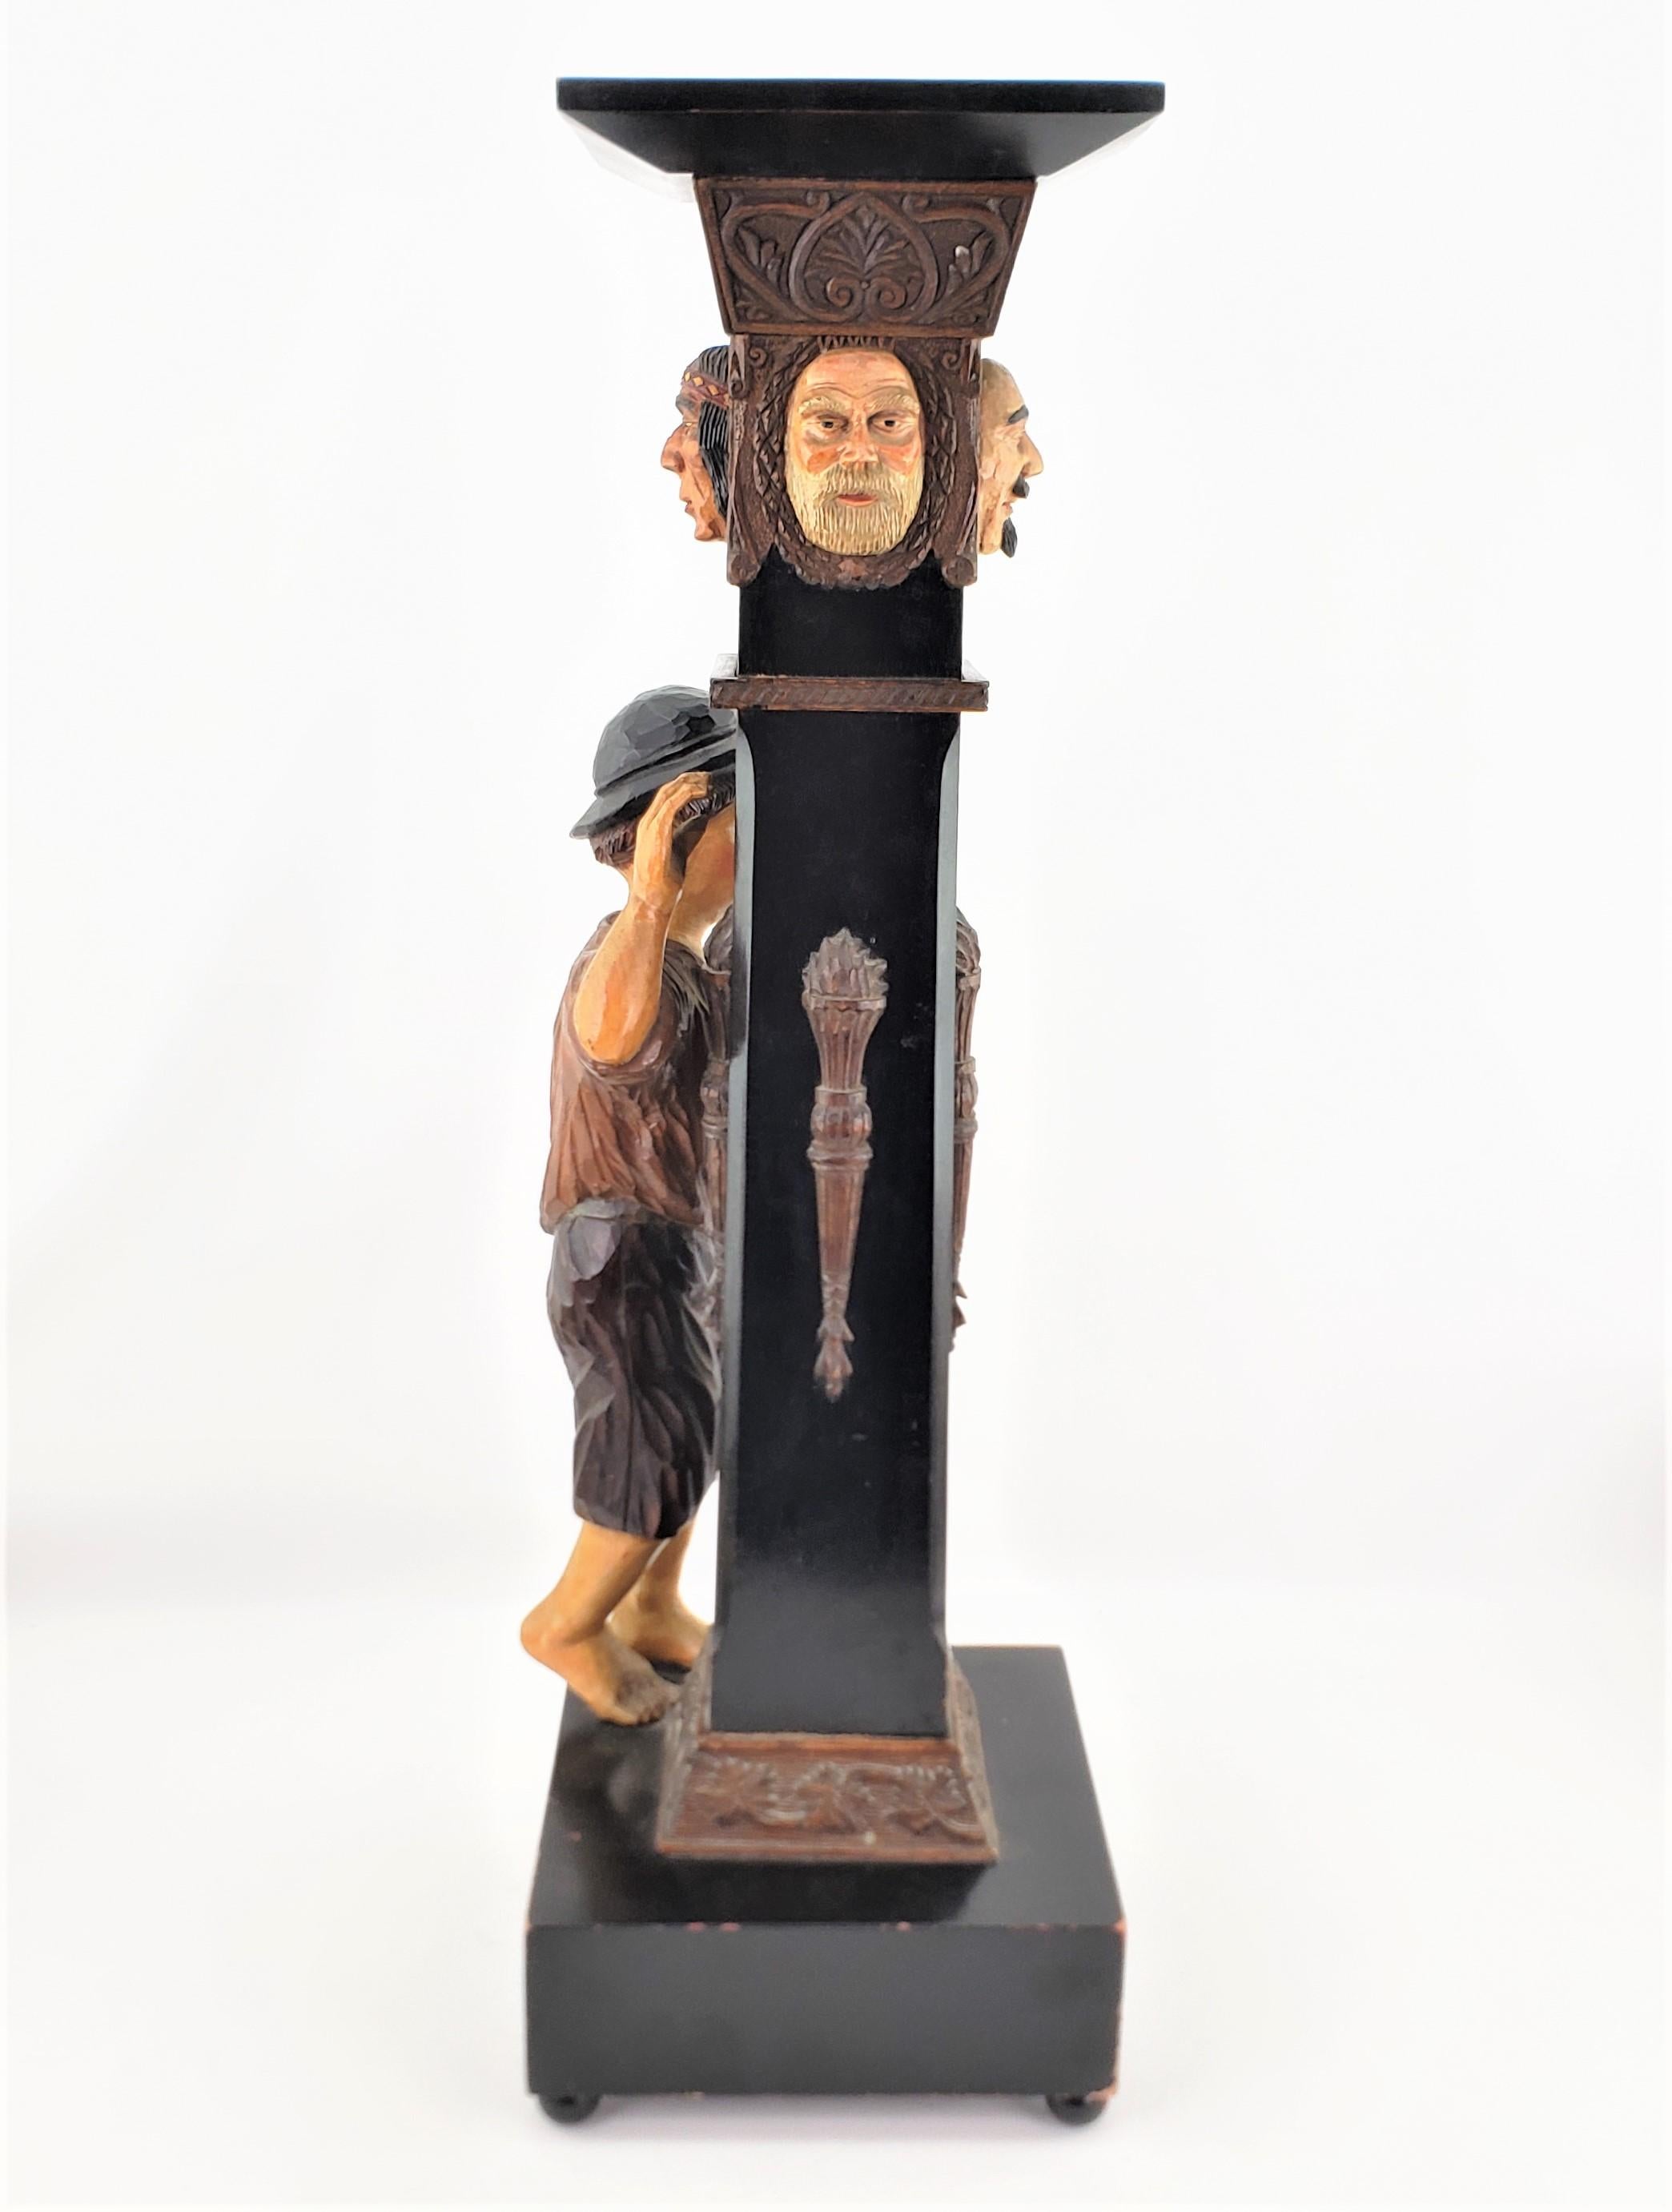 Antique Swiss or German Black Forest Styled Hand-Carved & Painted Pedestal In Good Condition For Sale In Hamilton, Ontario